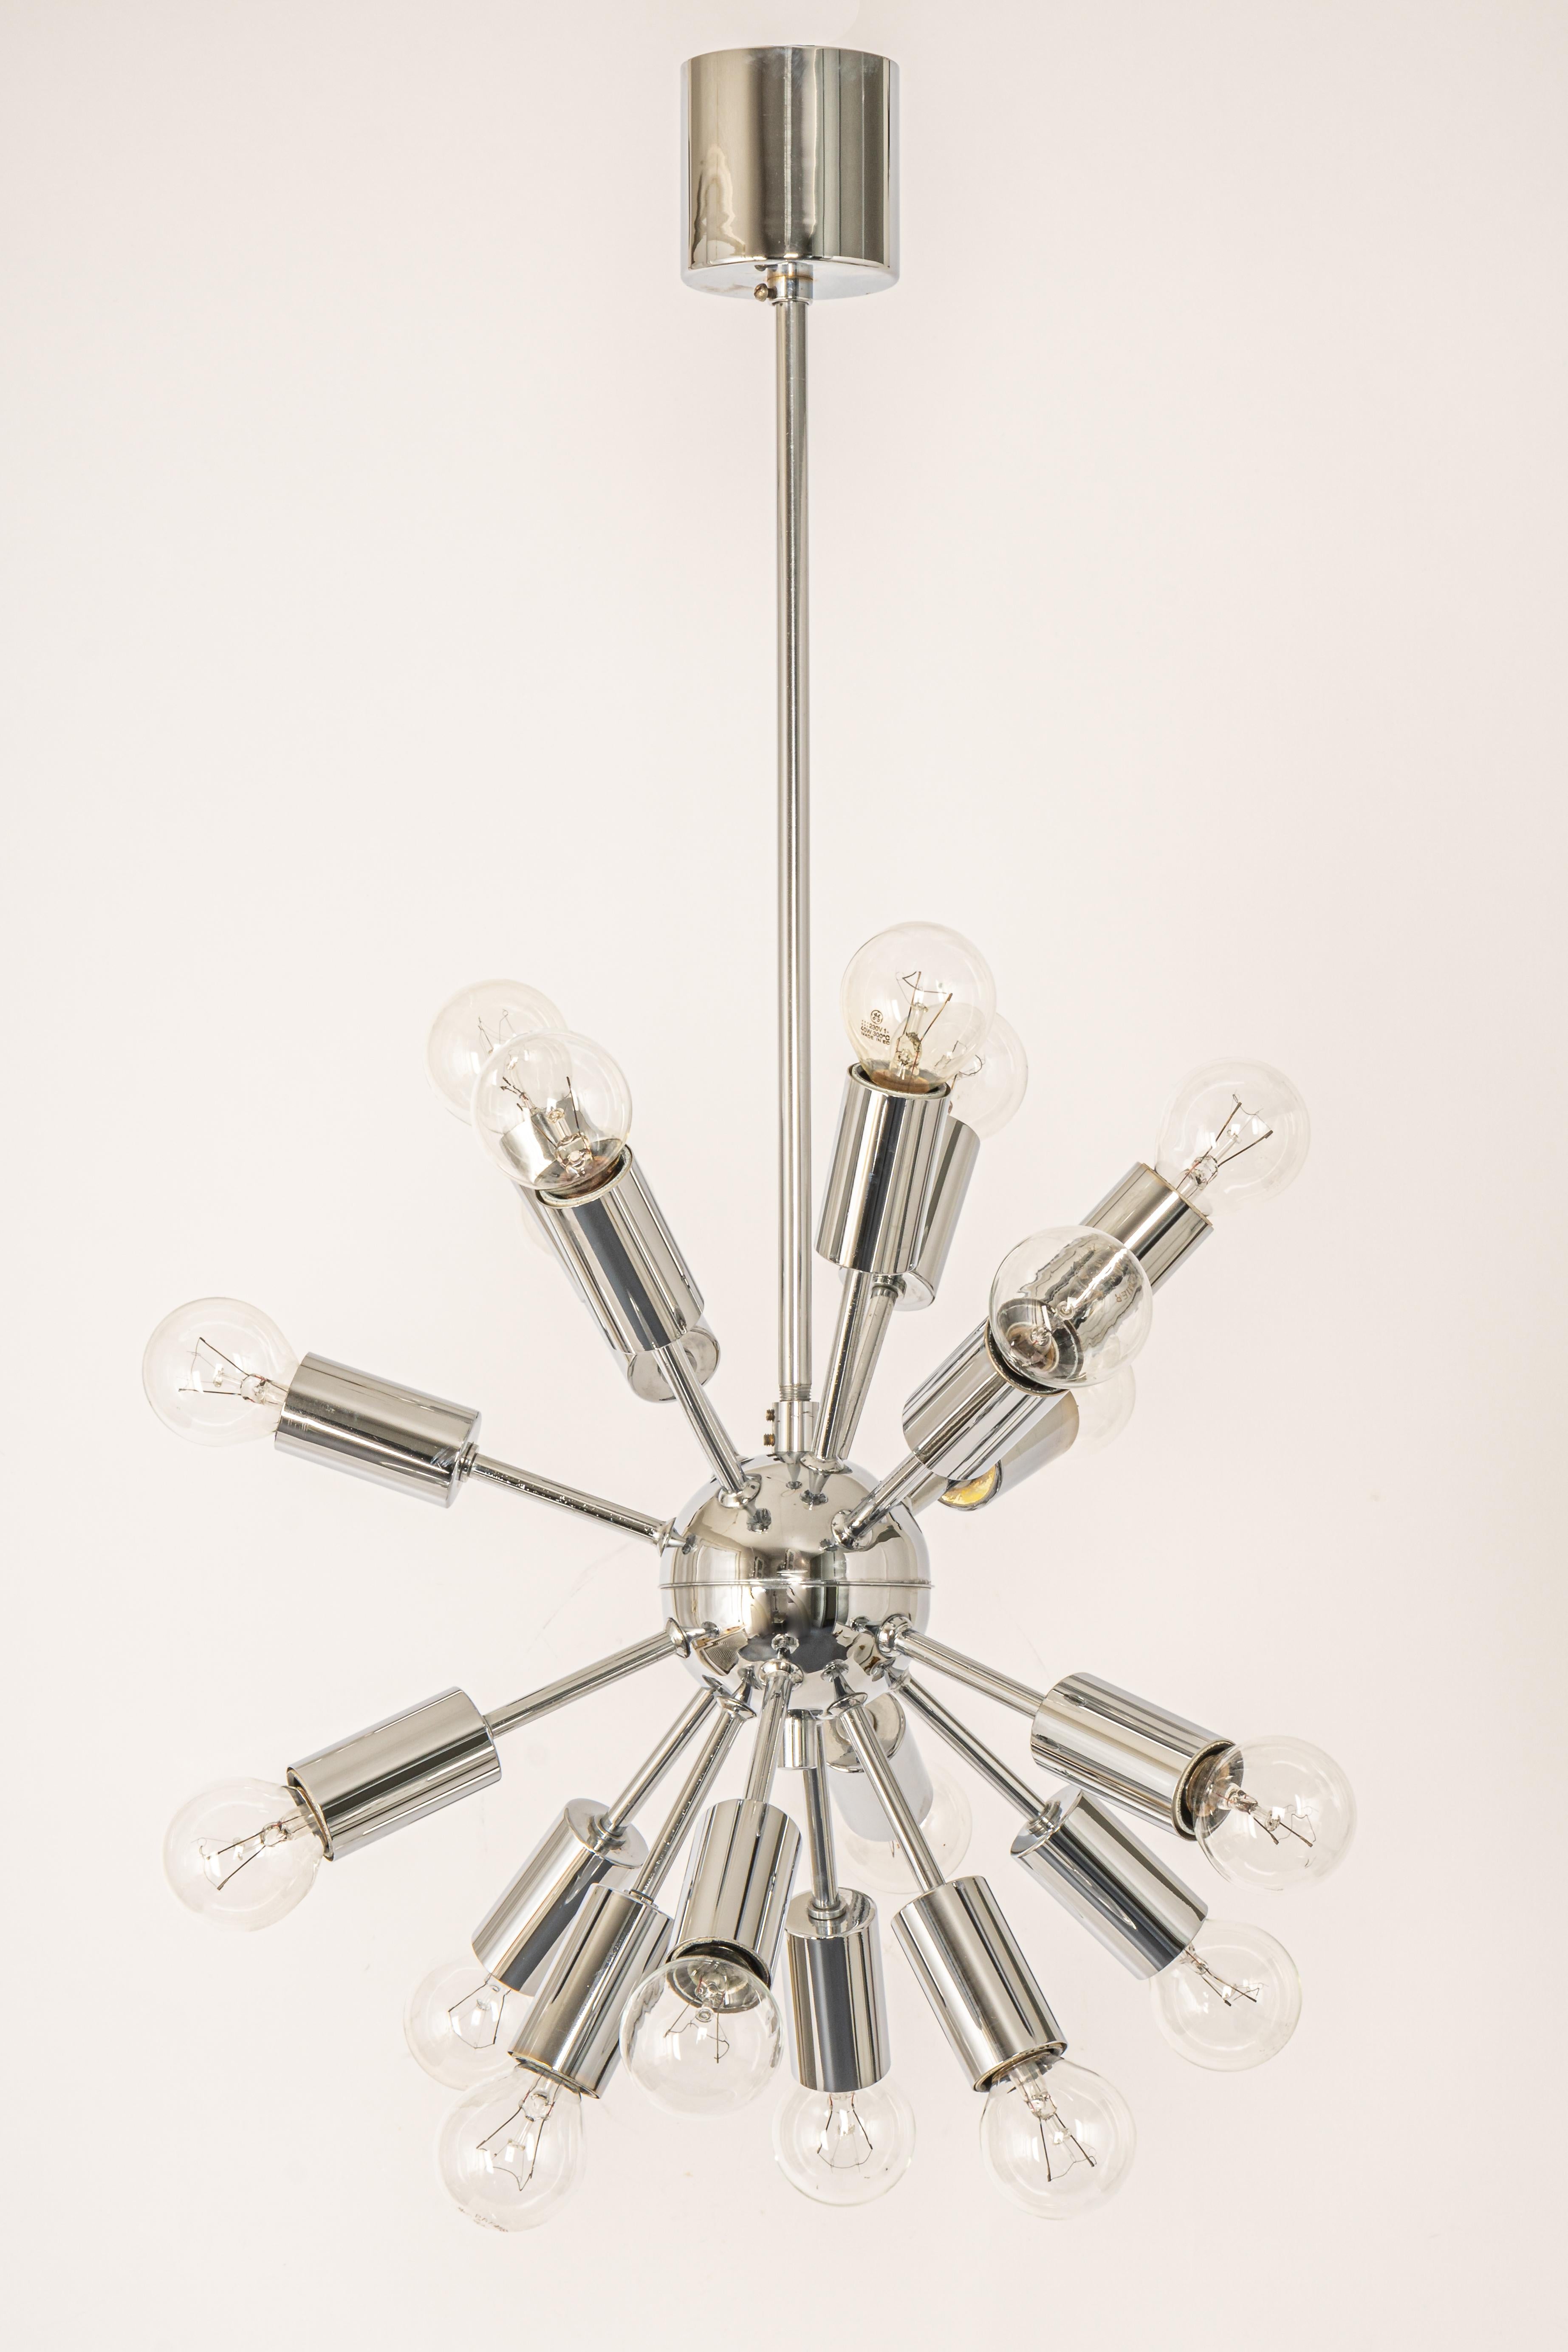 Petite Chrome Space Age Sputnik Atomium Pendant by Cosack, Germany, 1970s For Sale 1